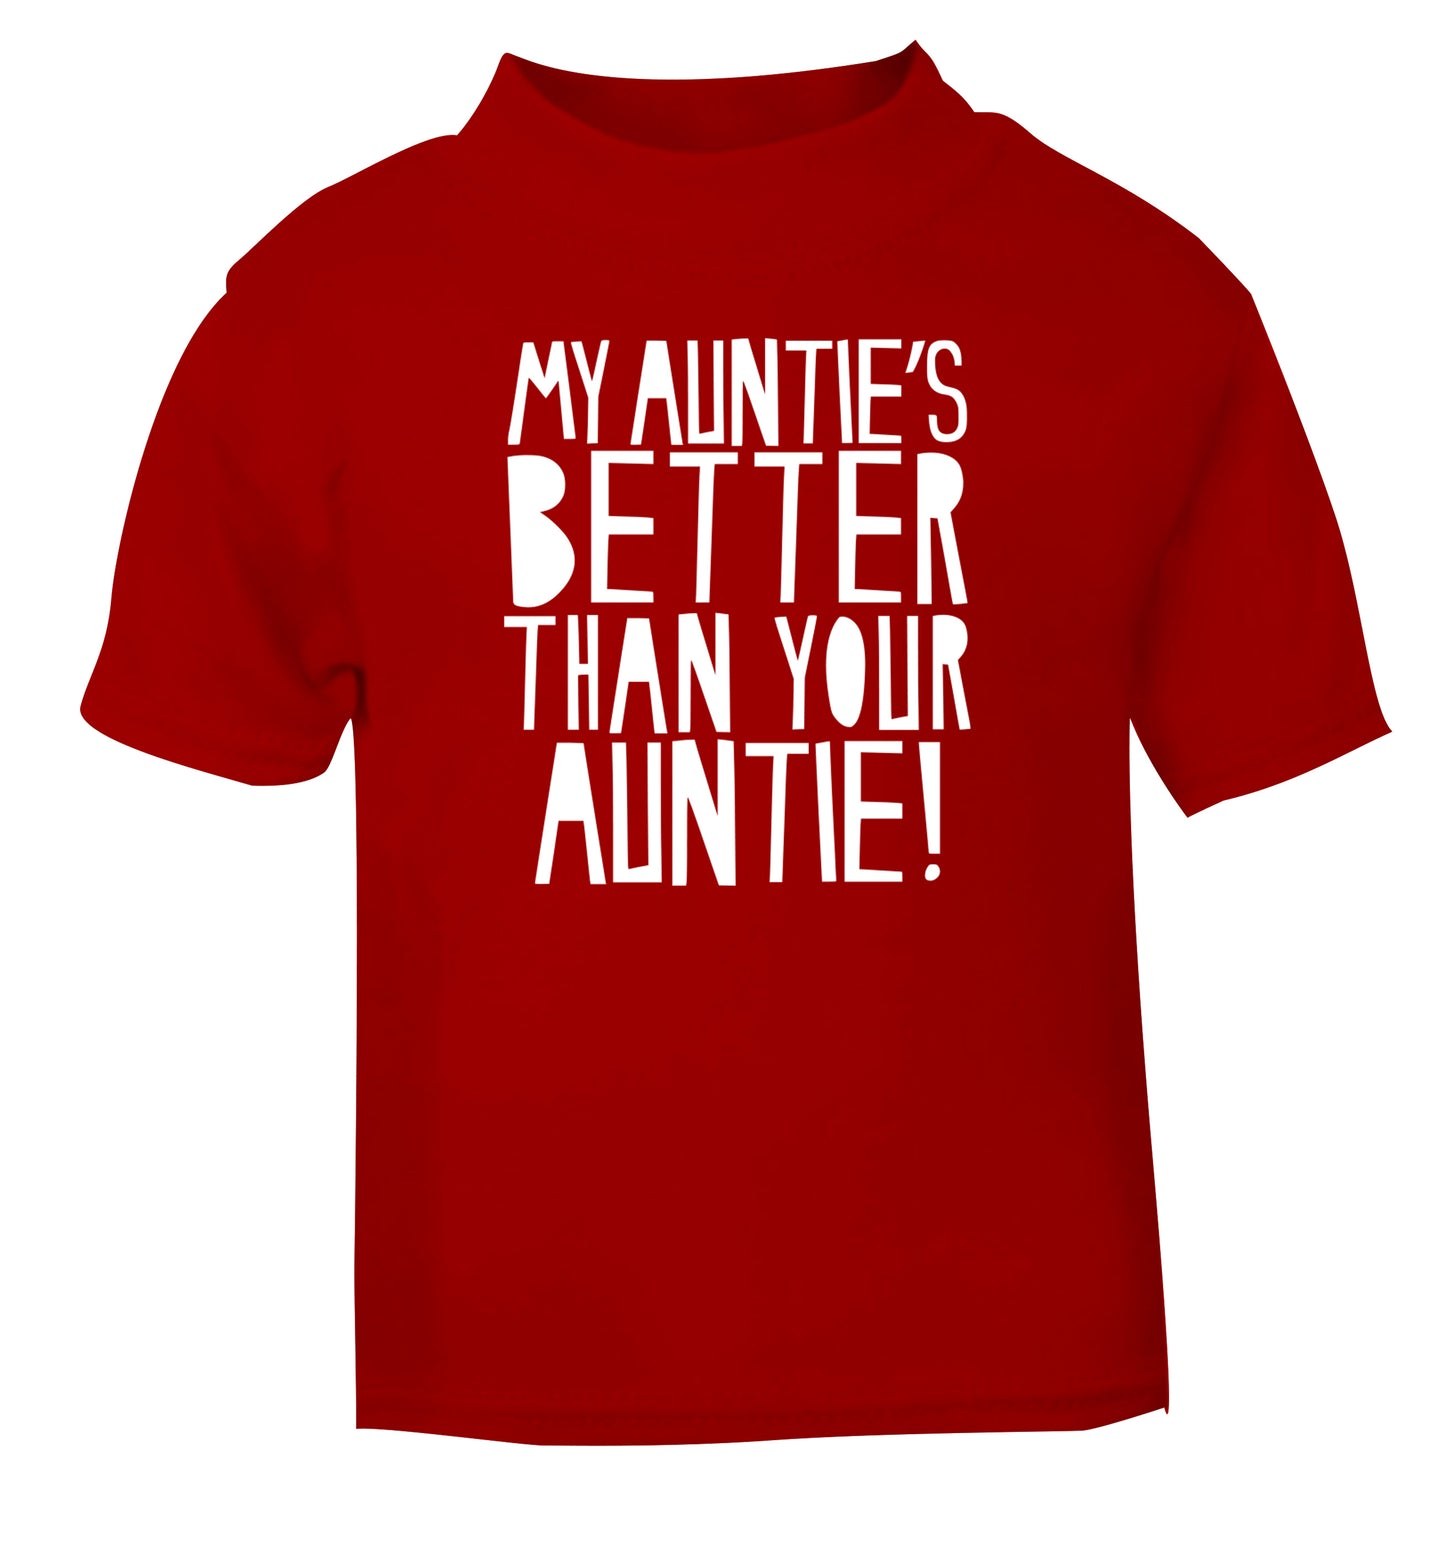 My auntie's better than your auntie red Baby Toddler Tshirt 2 Years